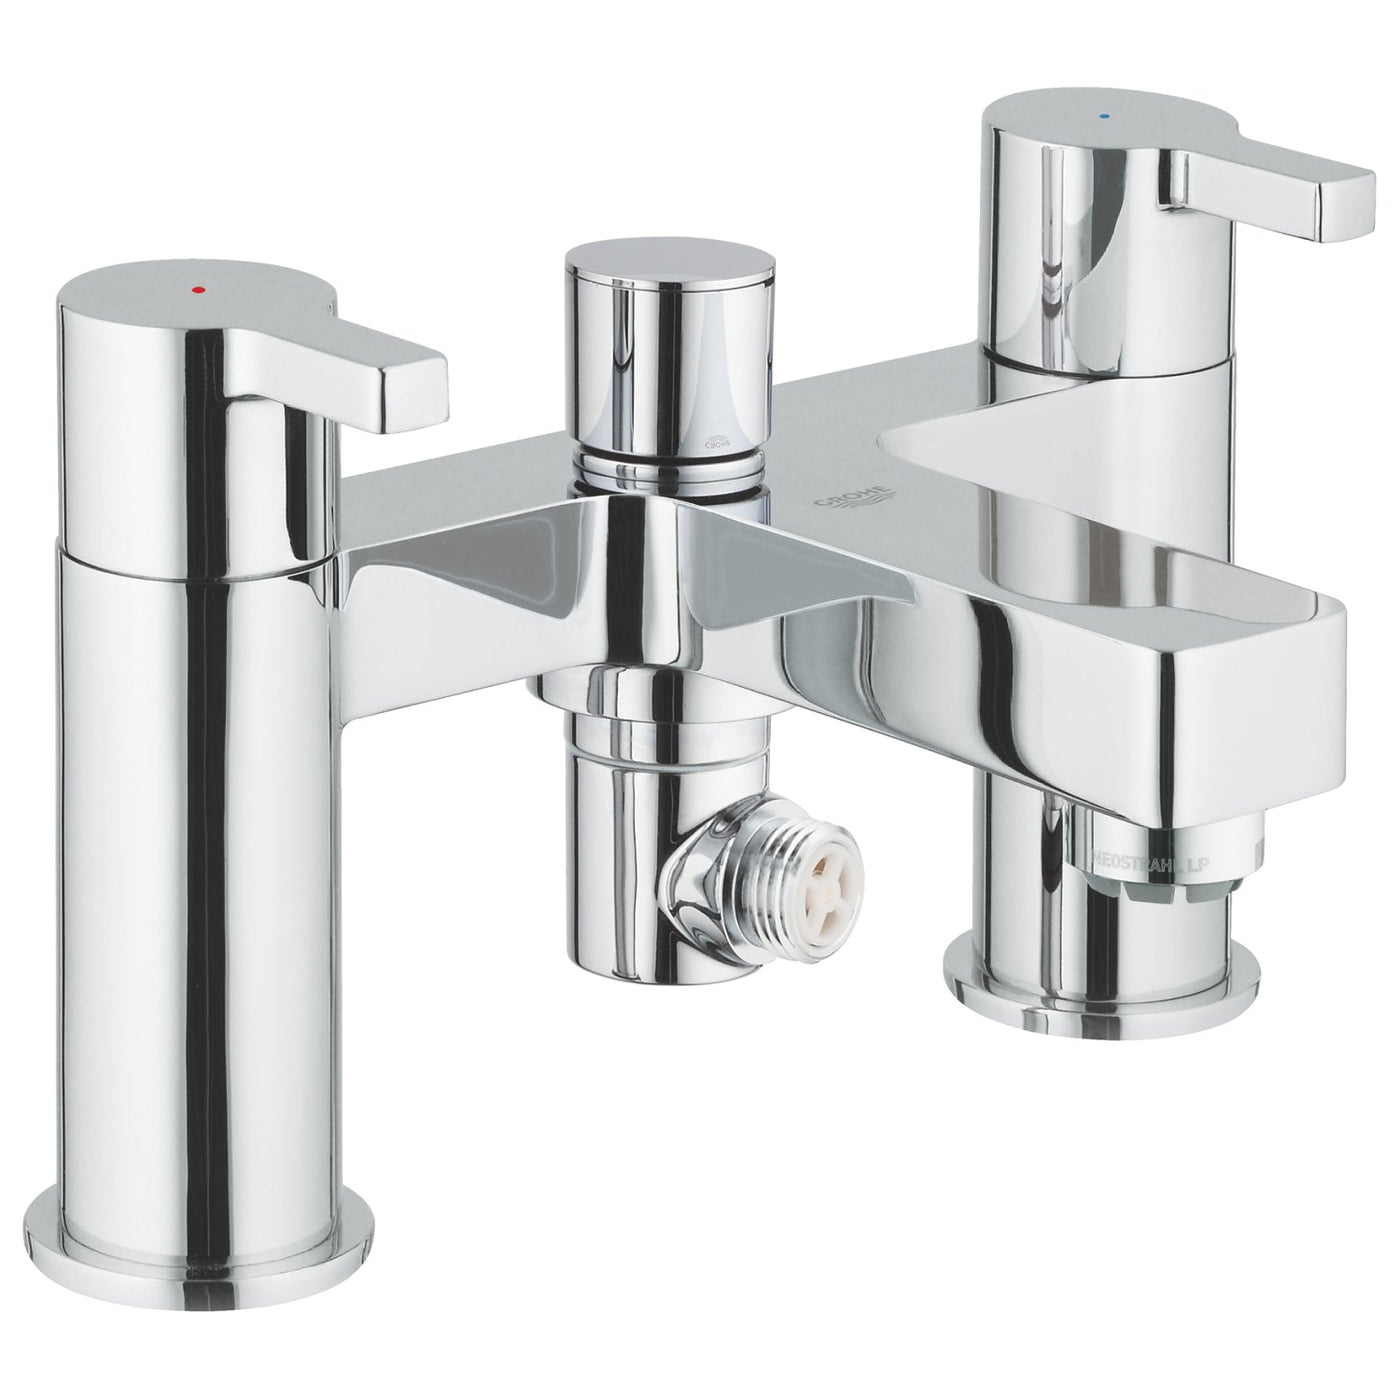 Grohe Deck Mounted Chrome Lineare Two-handled Bath/Shower mixer ﾽ" - Letta London - 